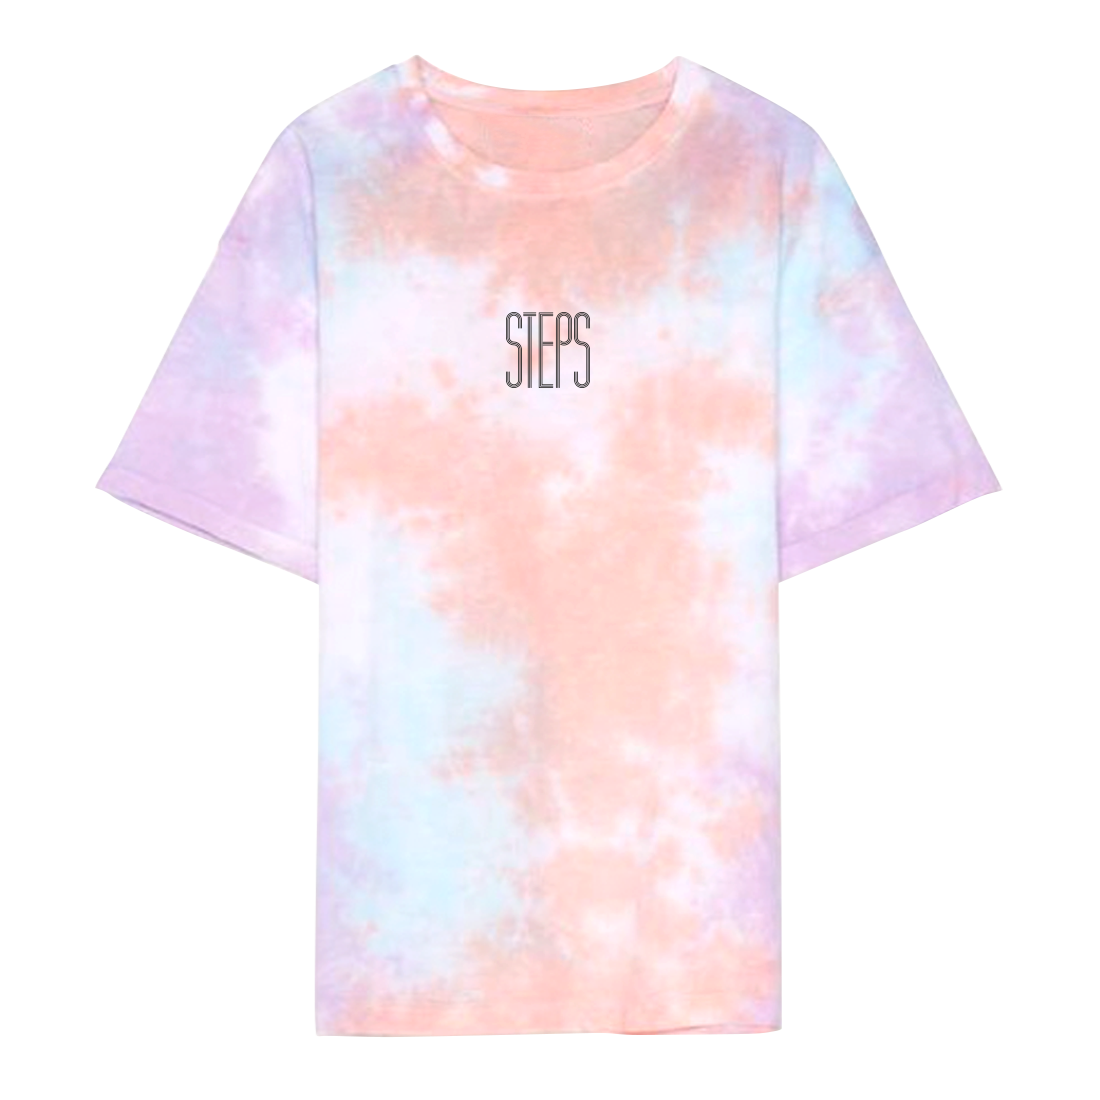 WHAT THE FUTURE HOLDS TIE DYE T-SHIRT